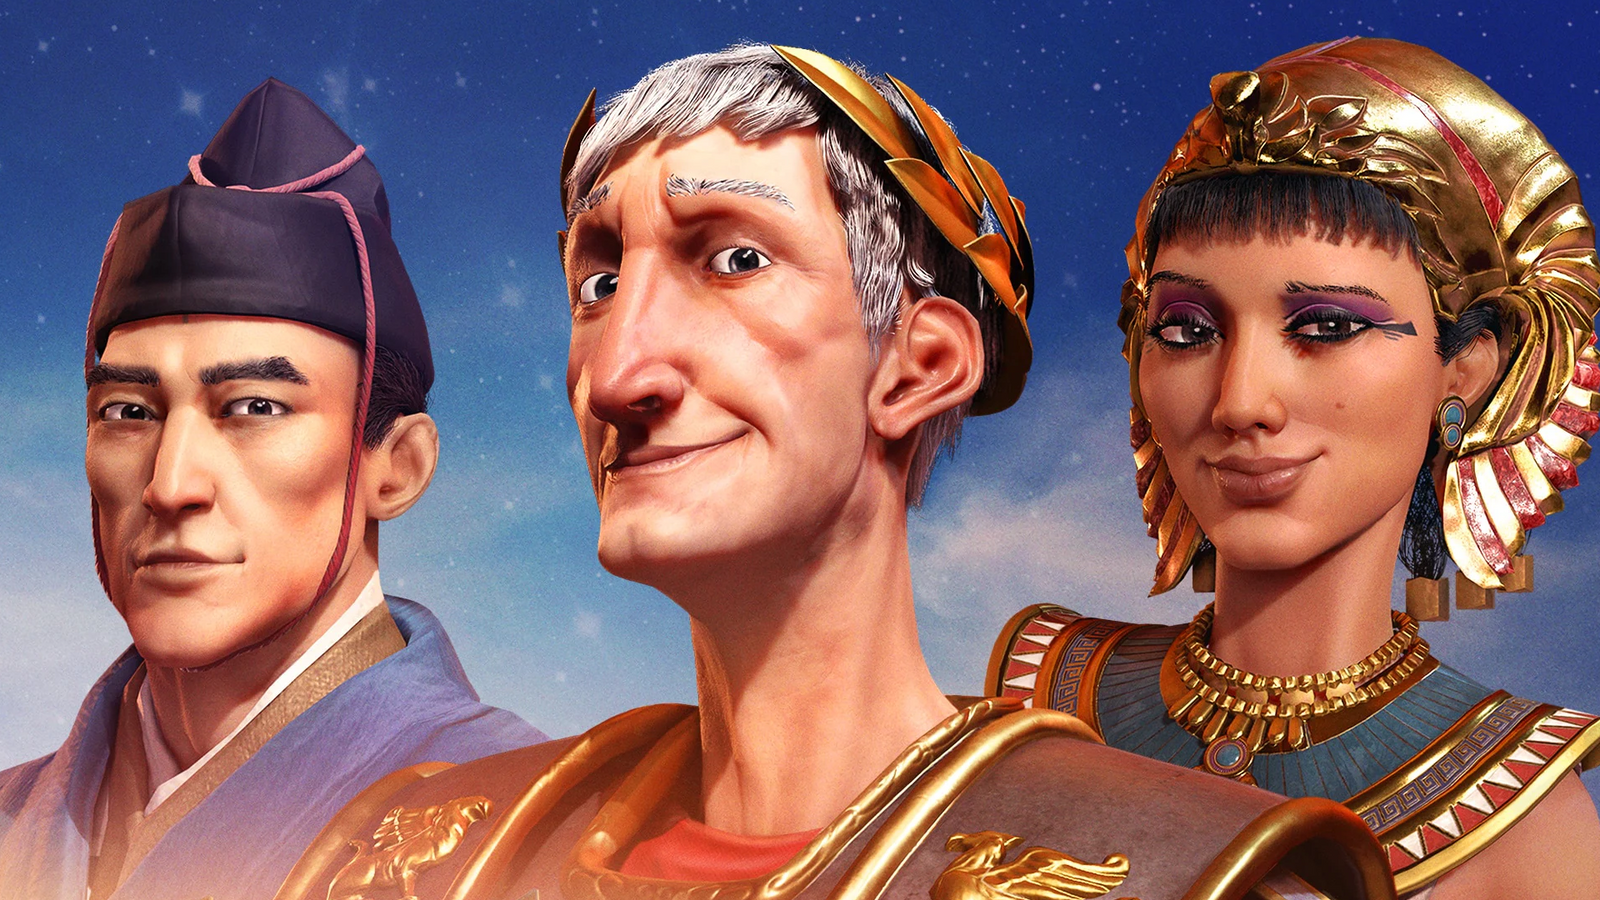 Civilization VI is getting new DLC in the form of a mysterious Leader Pass.